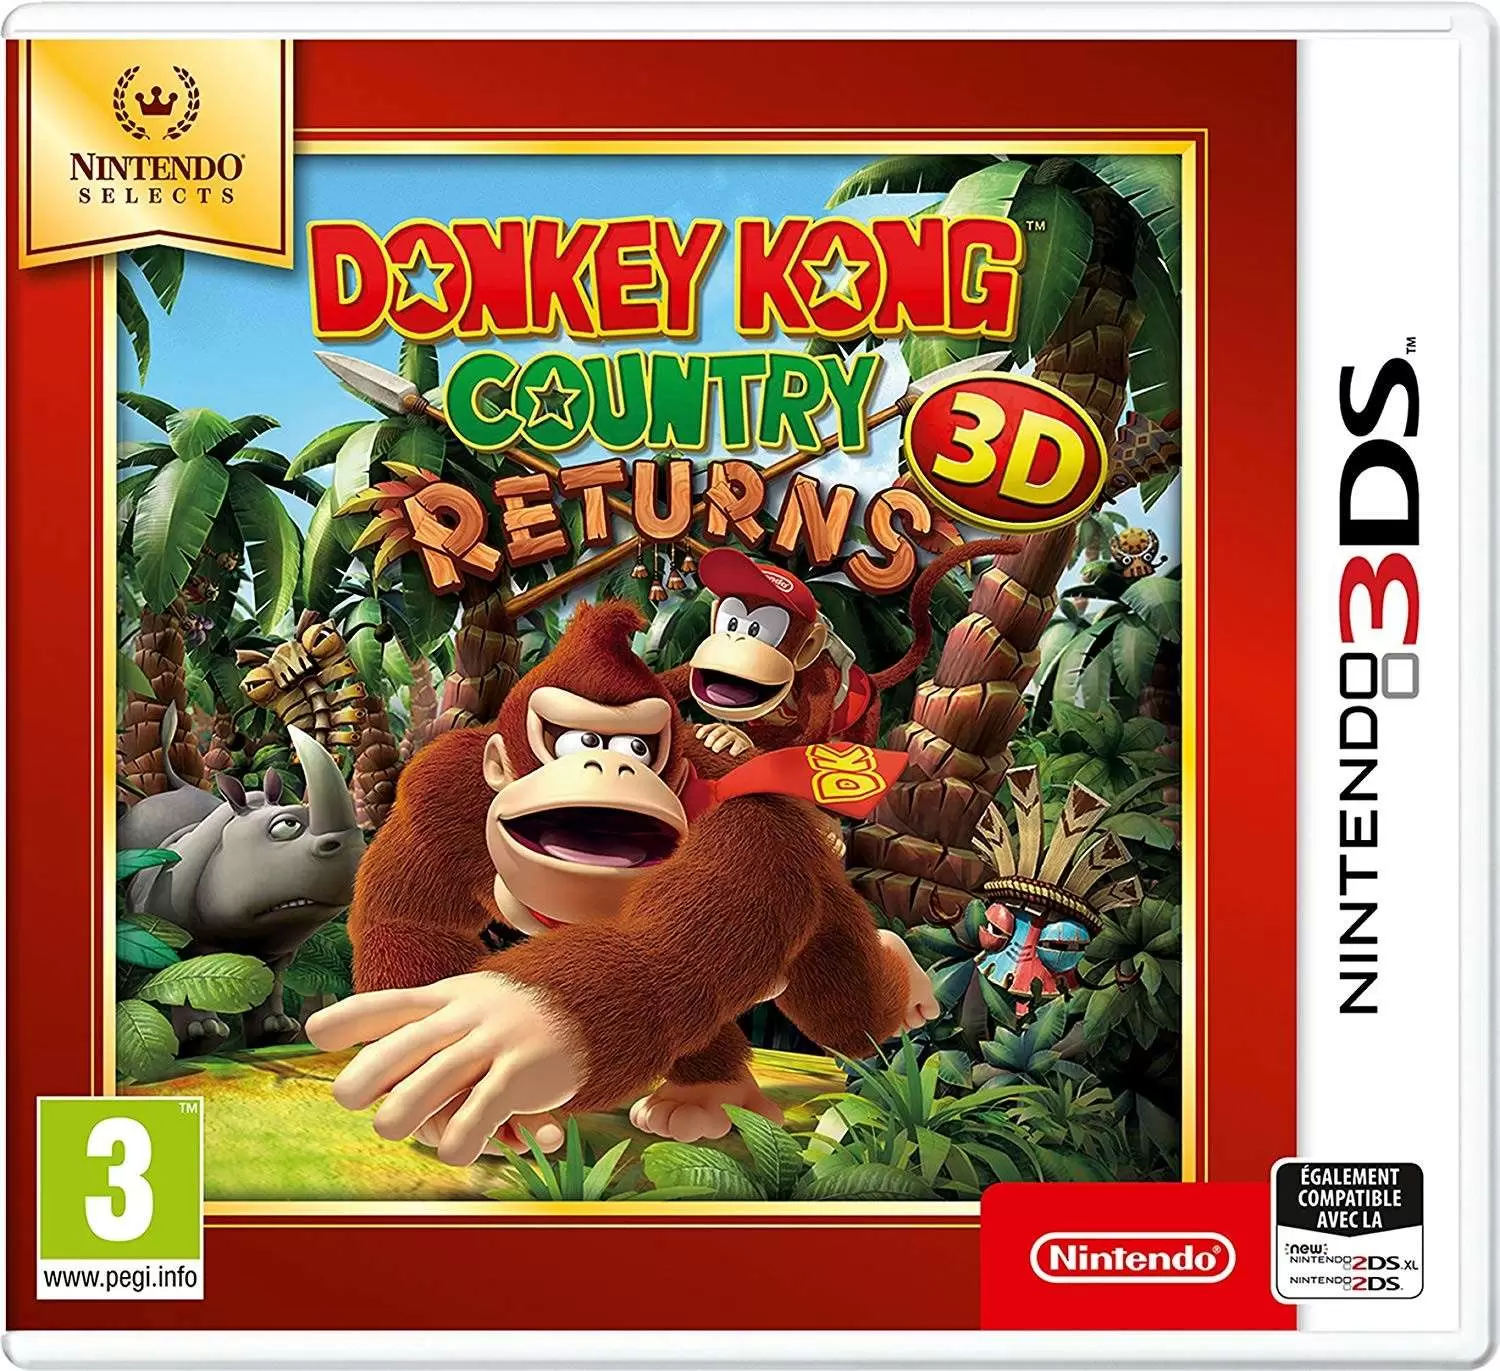 Jeux Nintendo 2DS / 3DS - Donkey Kong Country Returns (Nintendo Selects)